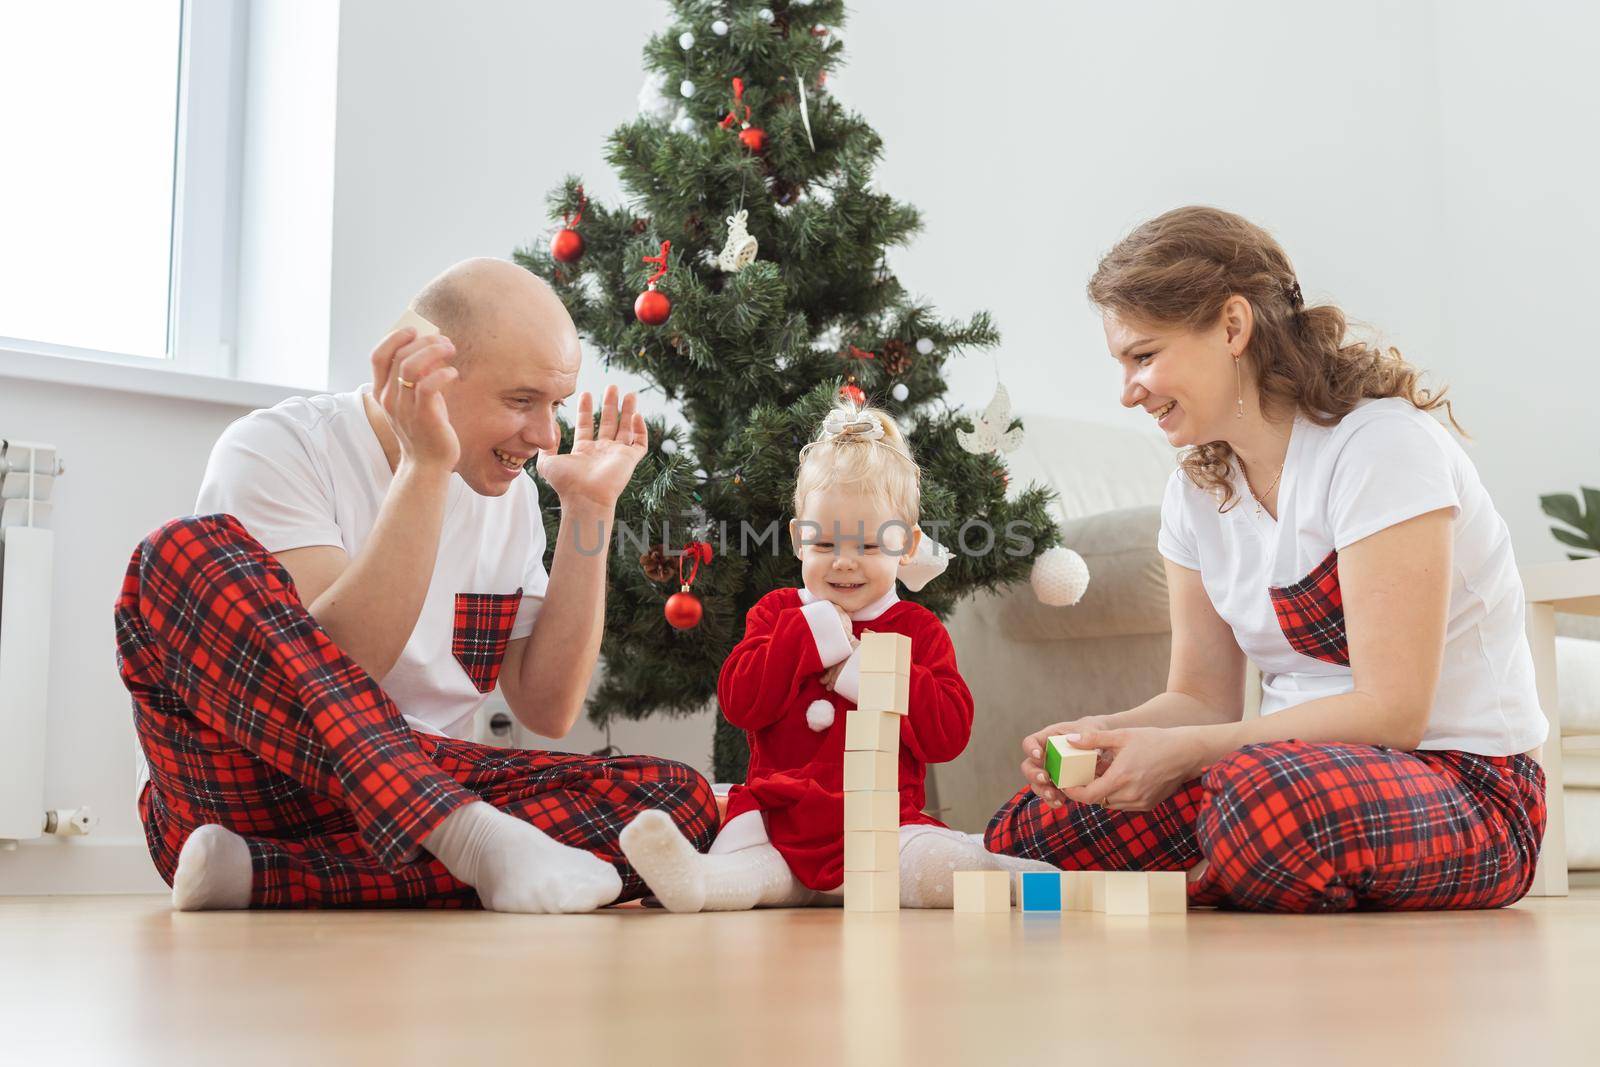 Toddler child with cochlear implant plays with parents under christmas tree in new year and winter holidays - innovating medical technologies for hearing aid and diversity by Satura86